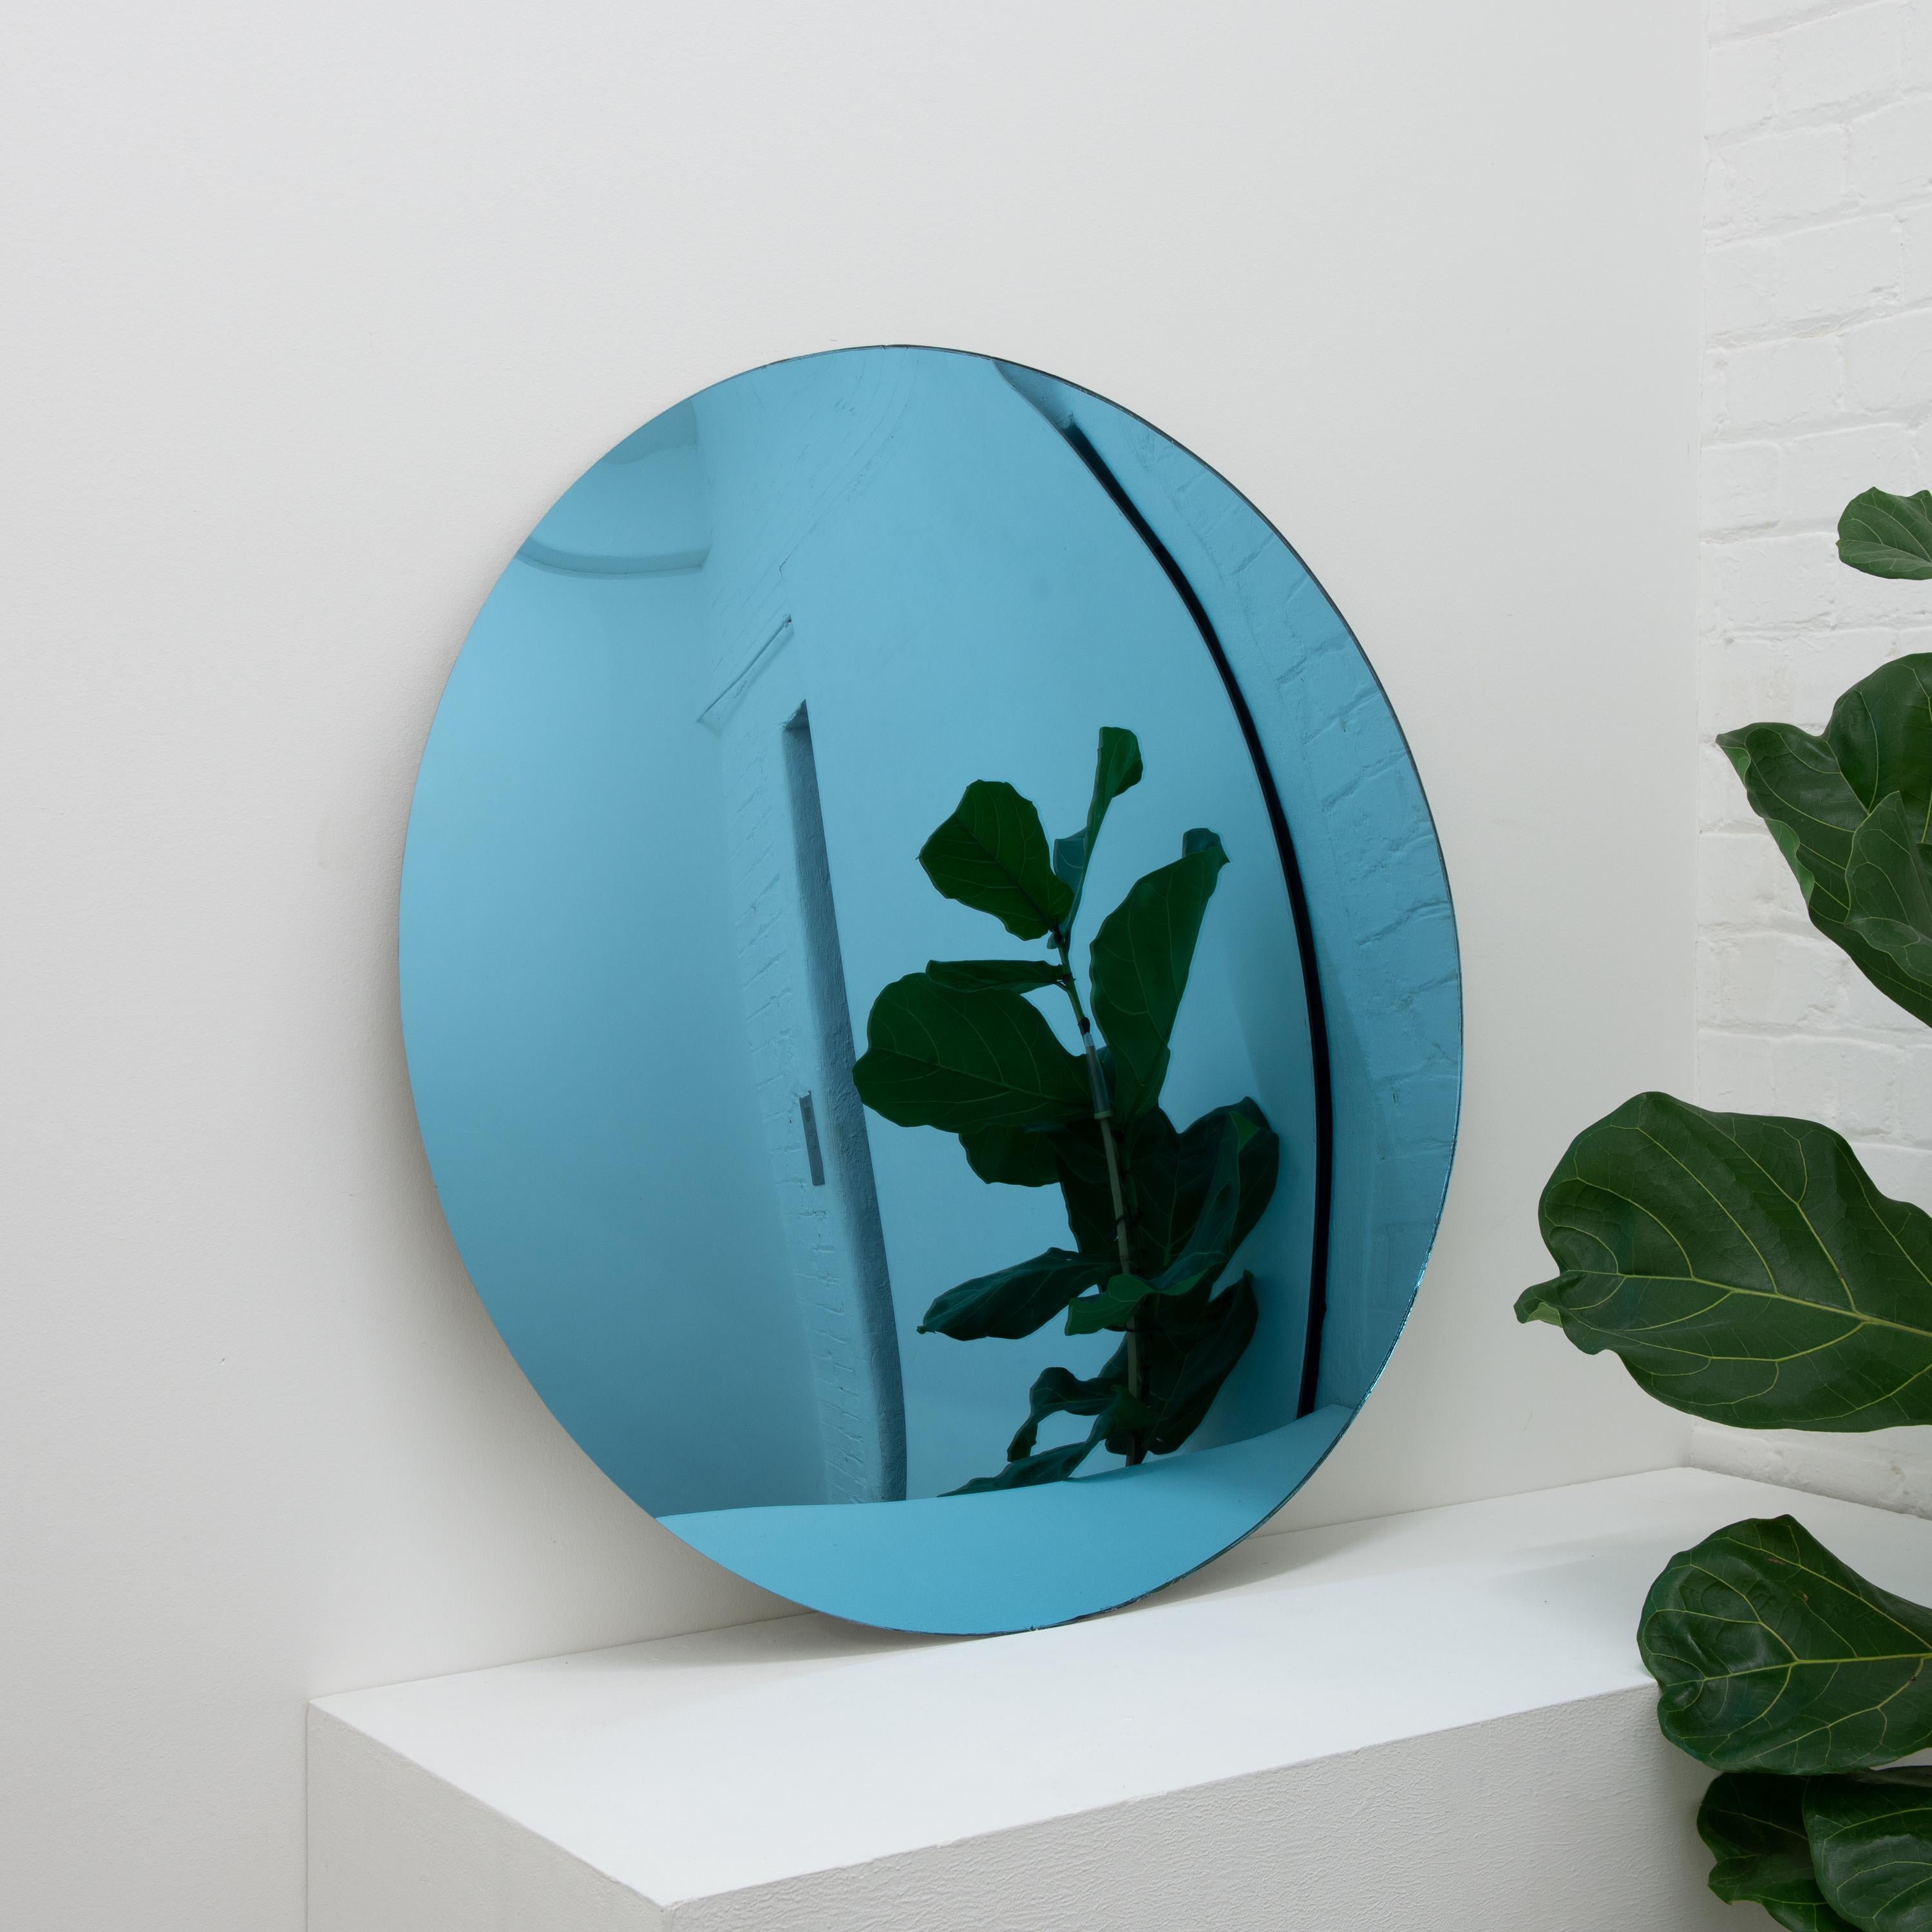 Orbis Convex Blue Handcrafted Frameless Contemporary Round Mirror, Large In New Condition For Sale In London, GB